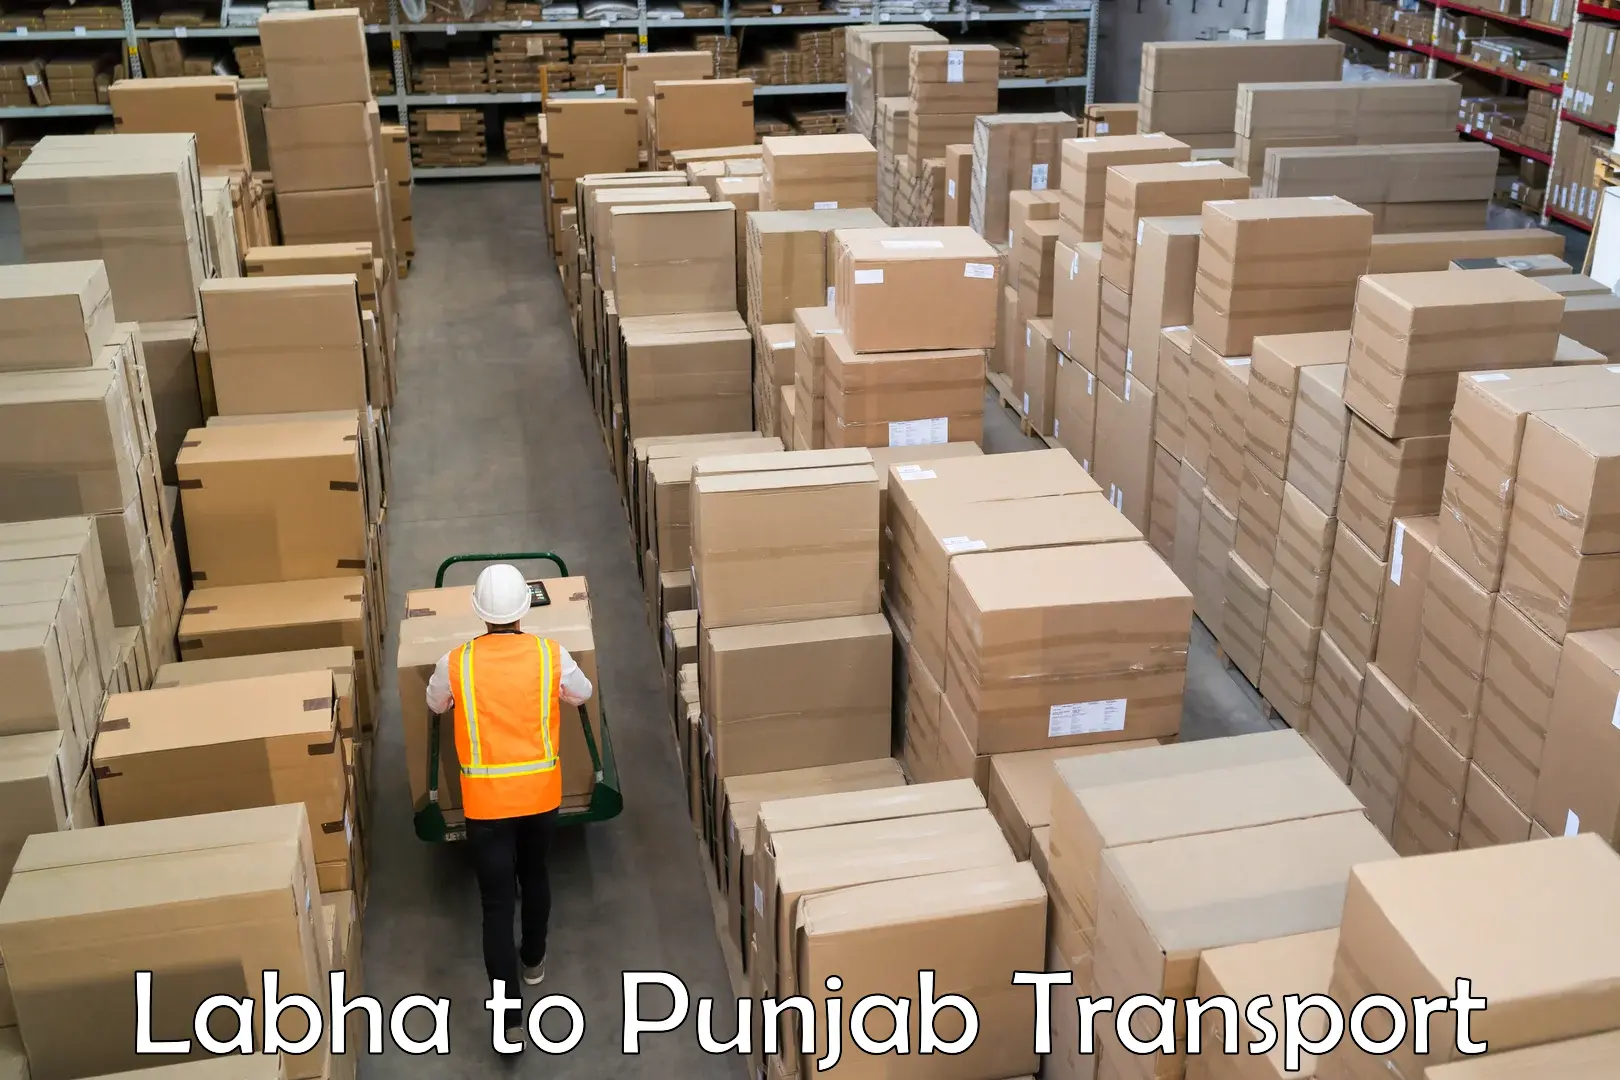 Truck transport companies in India in Labha to Mohali